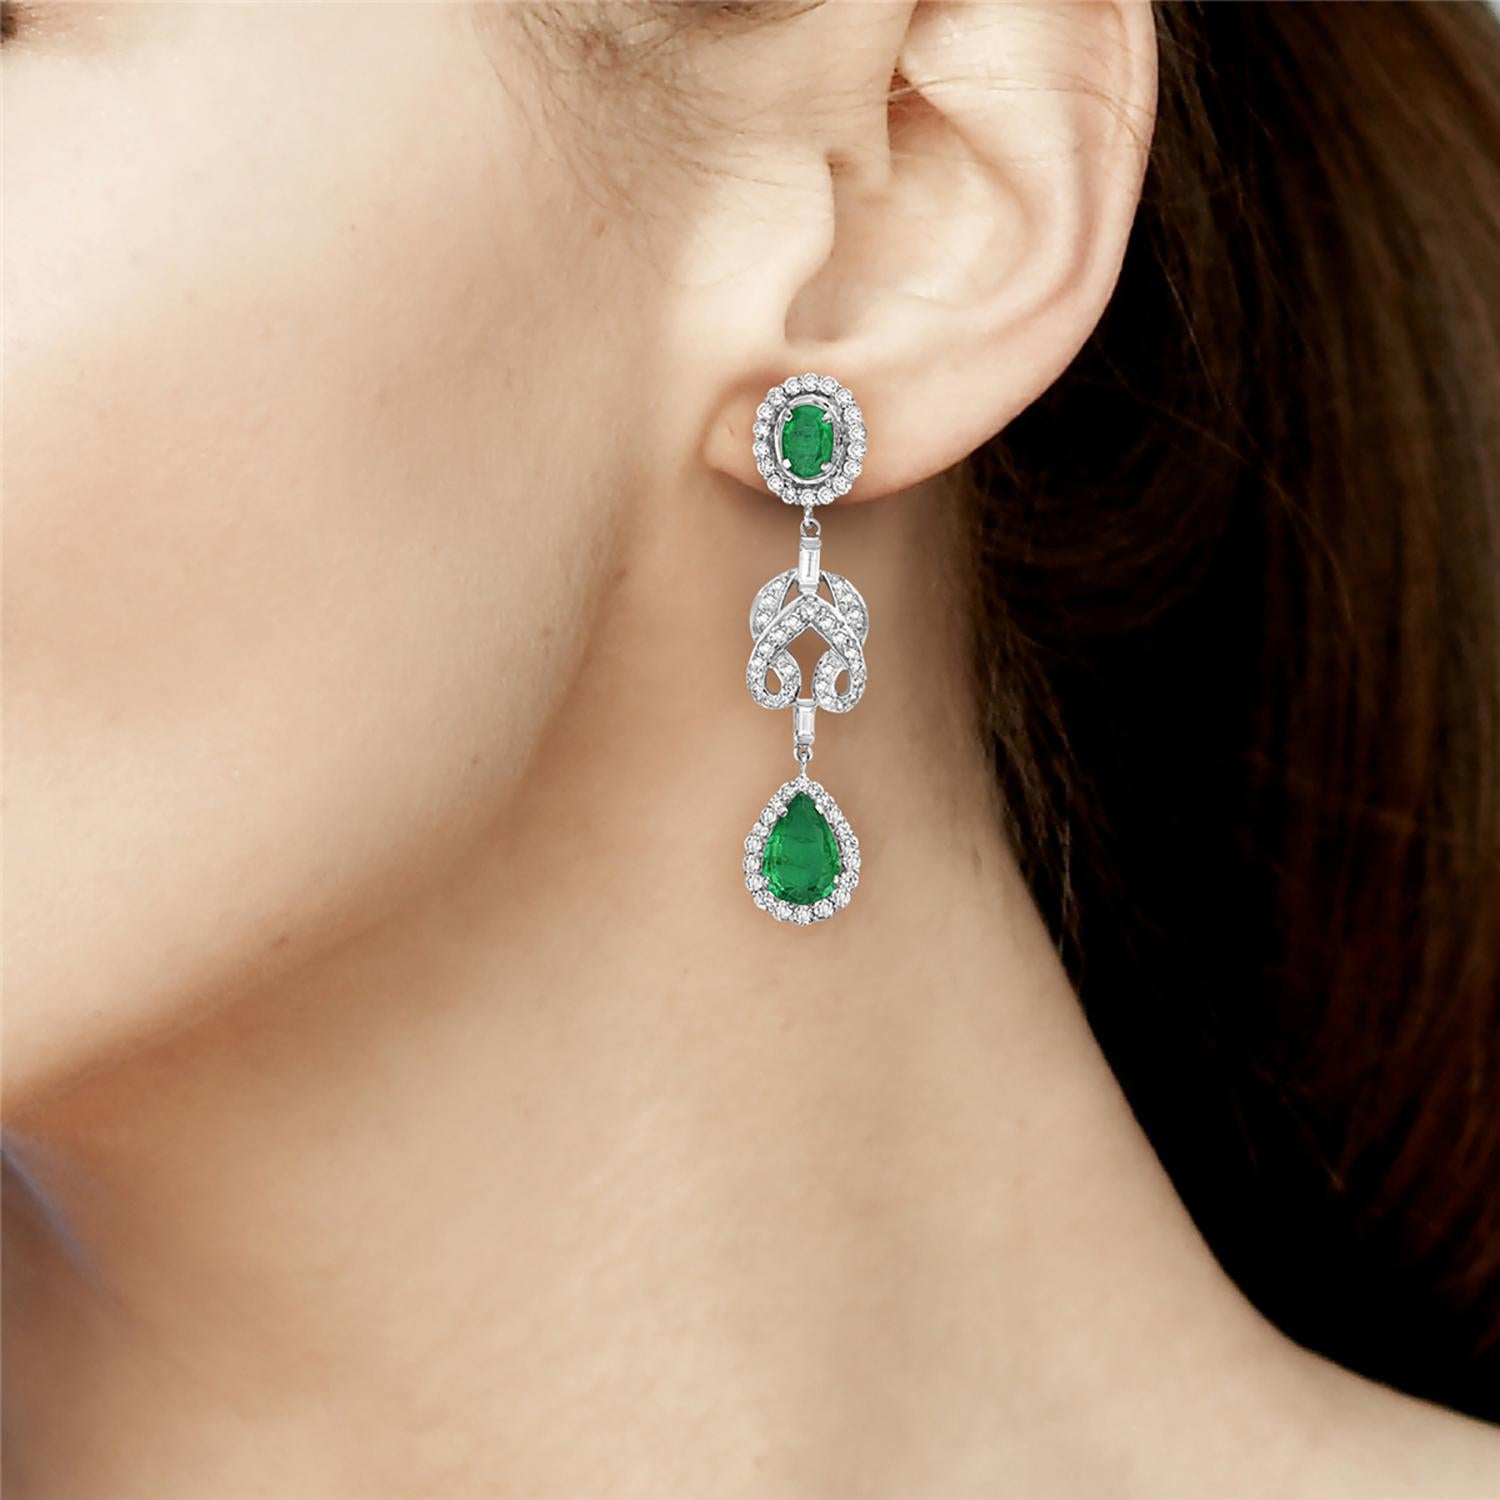 Experience timeless elegance with our 18k white gold Oval & Pear Shaped Emerald Earrings. These stunning earrings feature a beautiful knot shape design, embellished with pave diamonds. The perfect blend of classic and modern, these earrings are sure